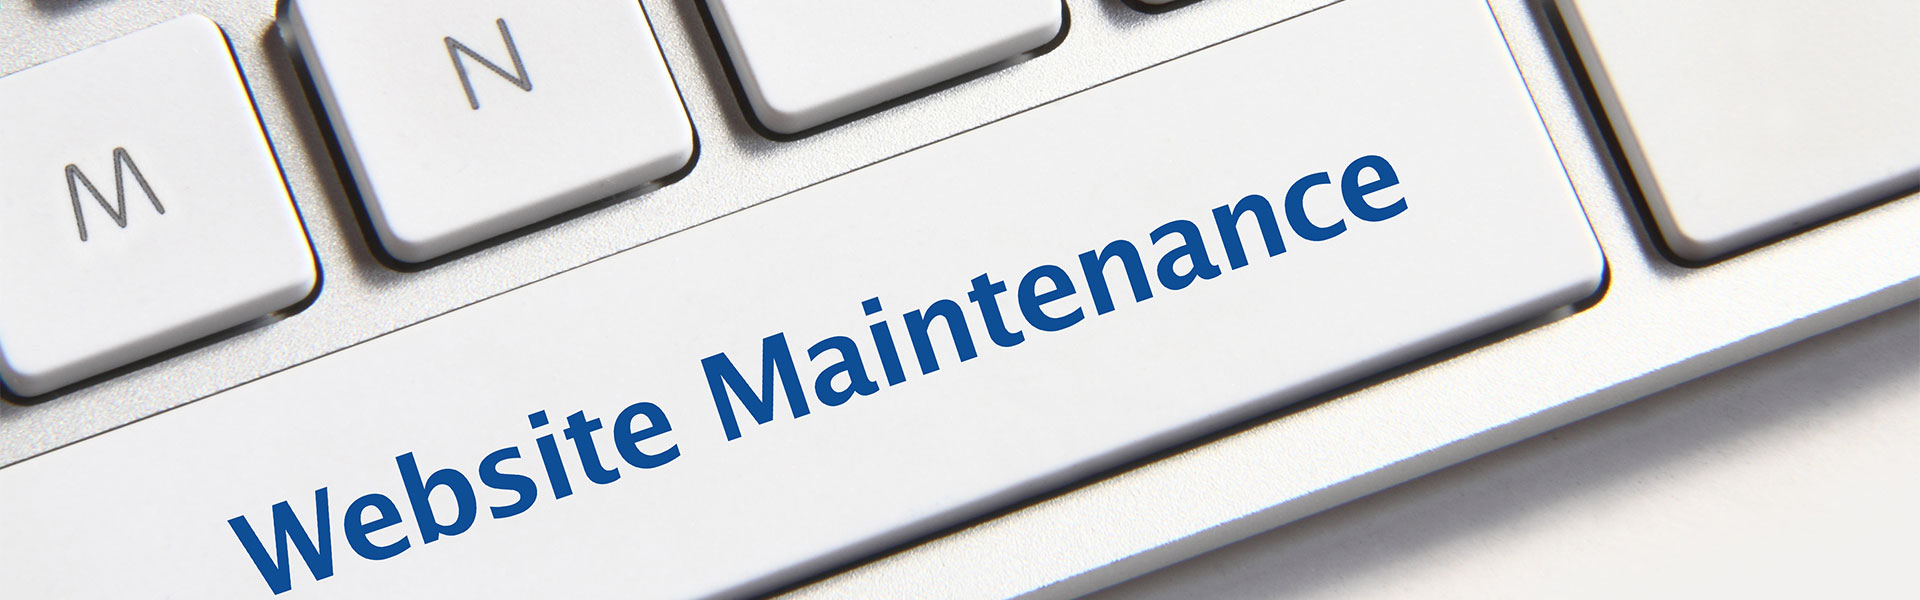 We offer website maintenance as well as social media pages maintenance when required.